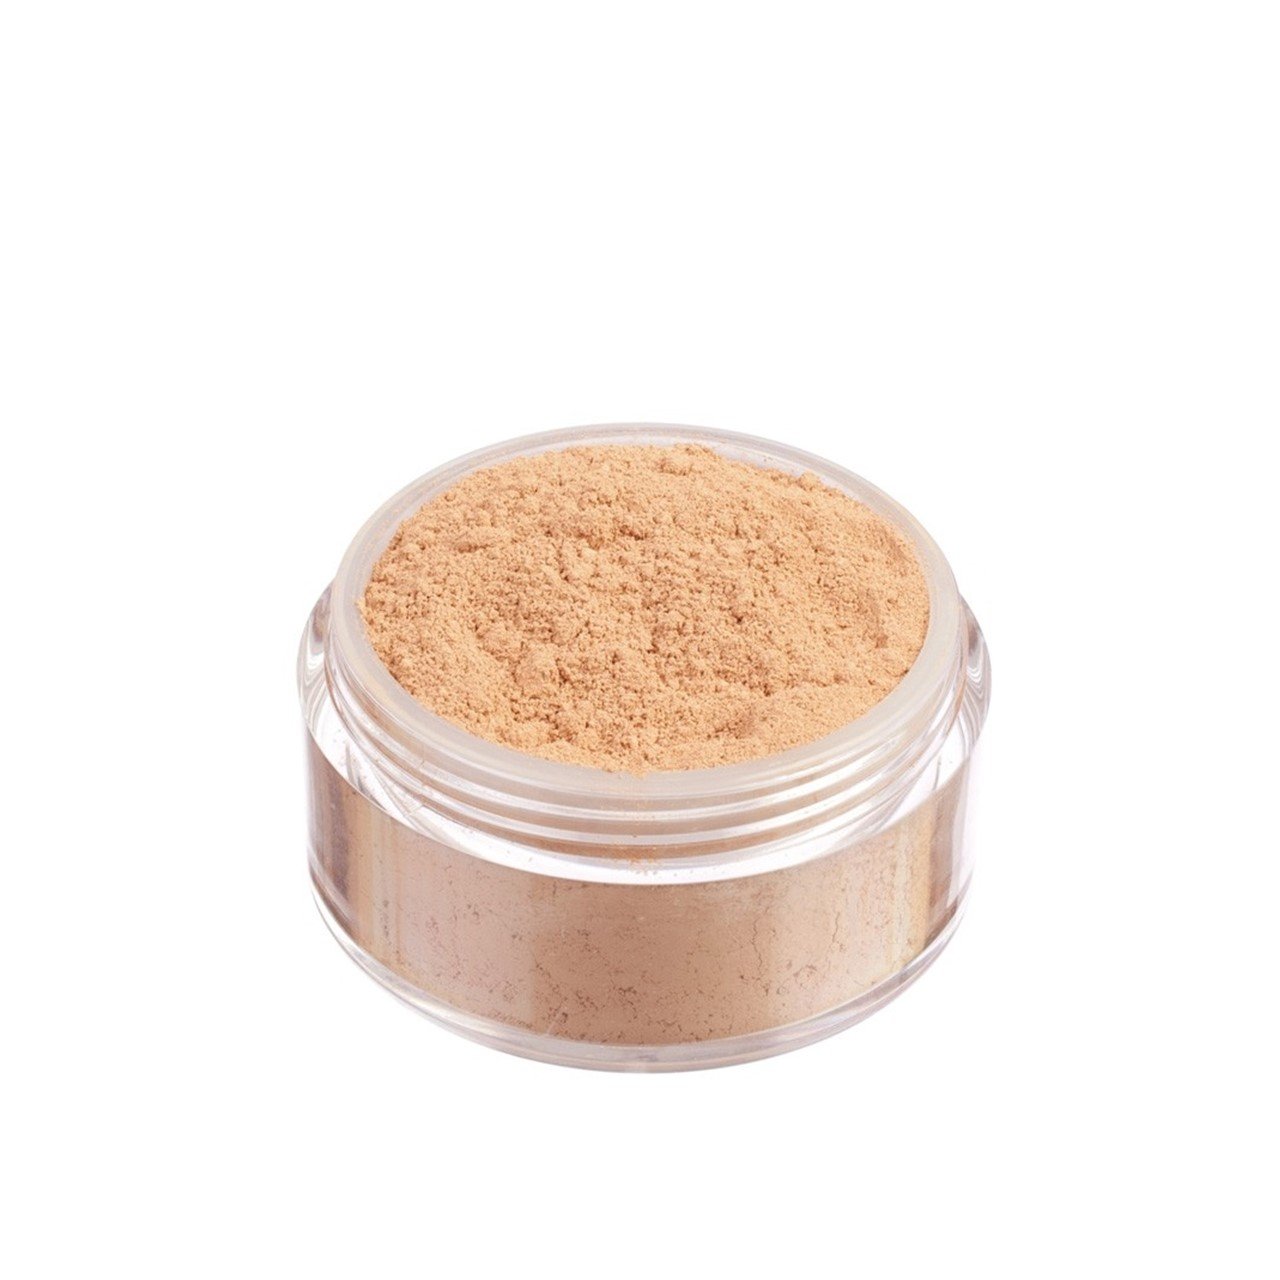 Neve Cosmetics High Coverage Mineral Foundation Tan Warm 8g